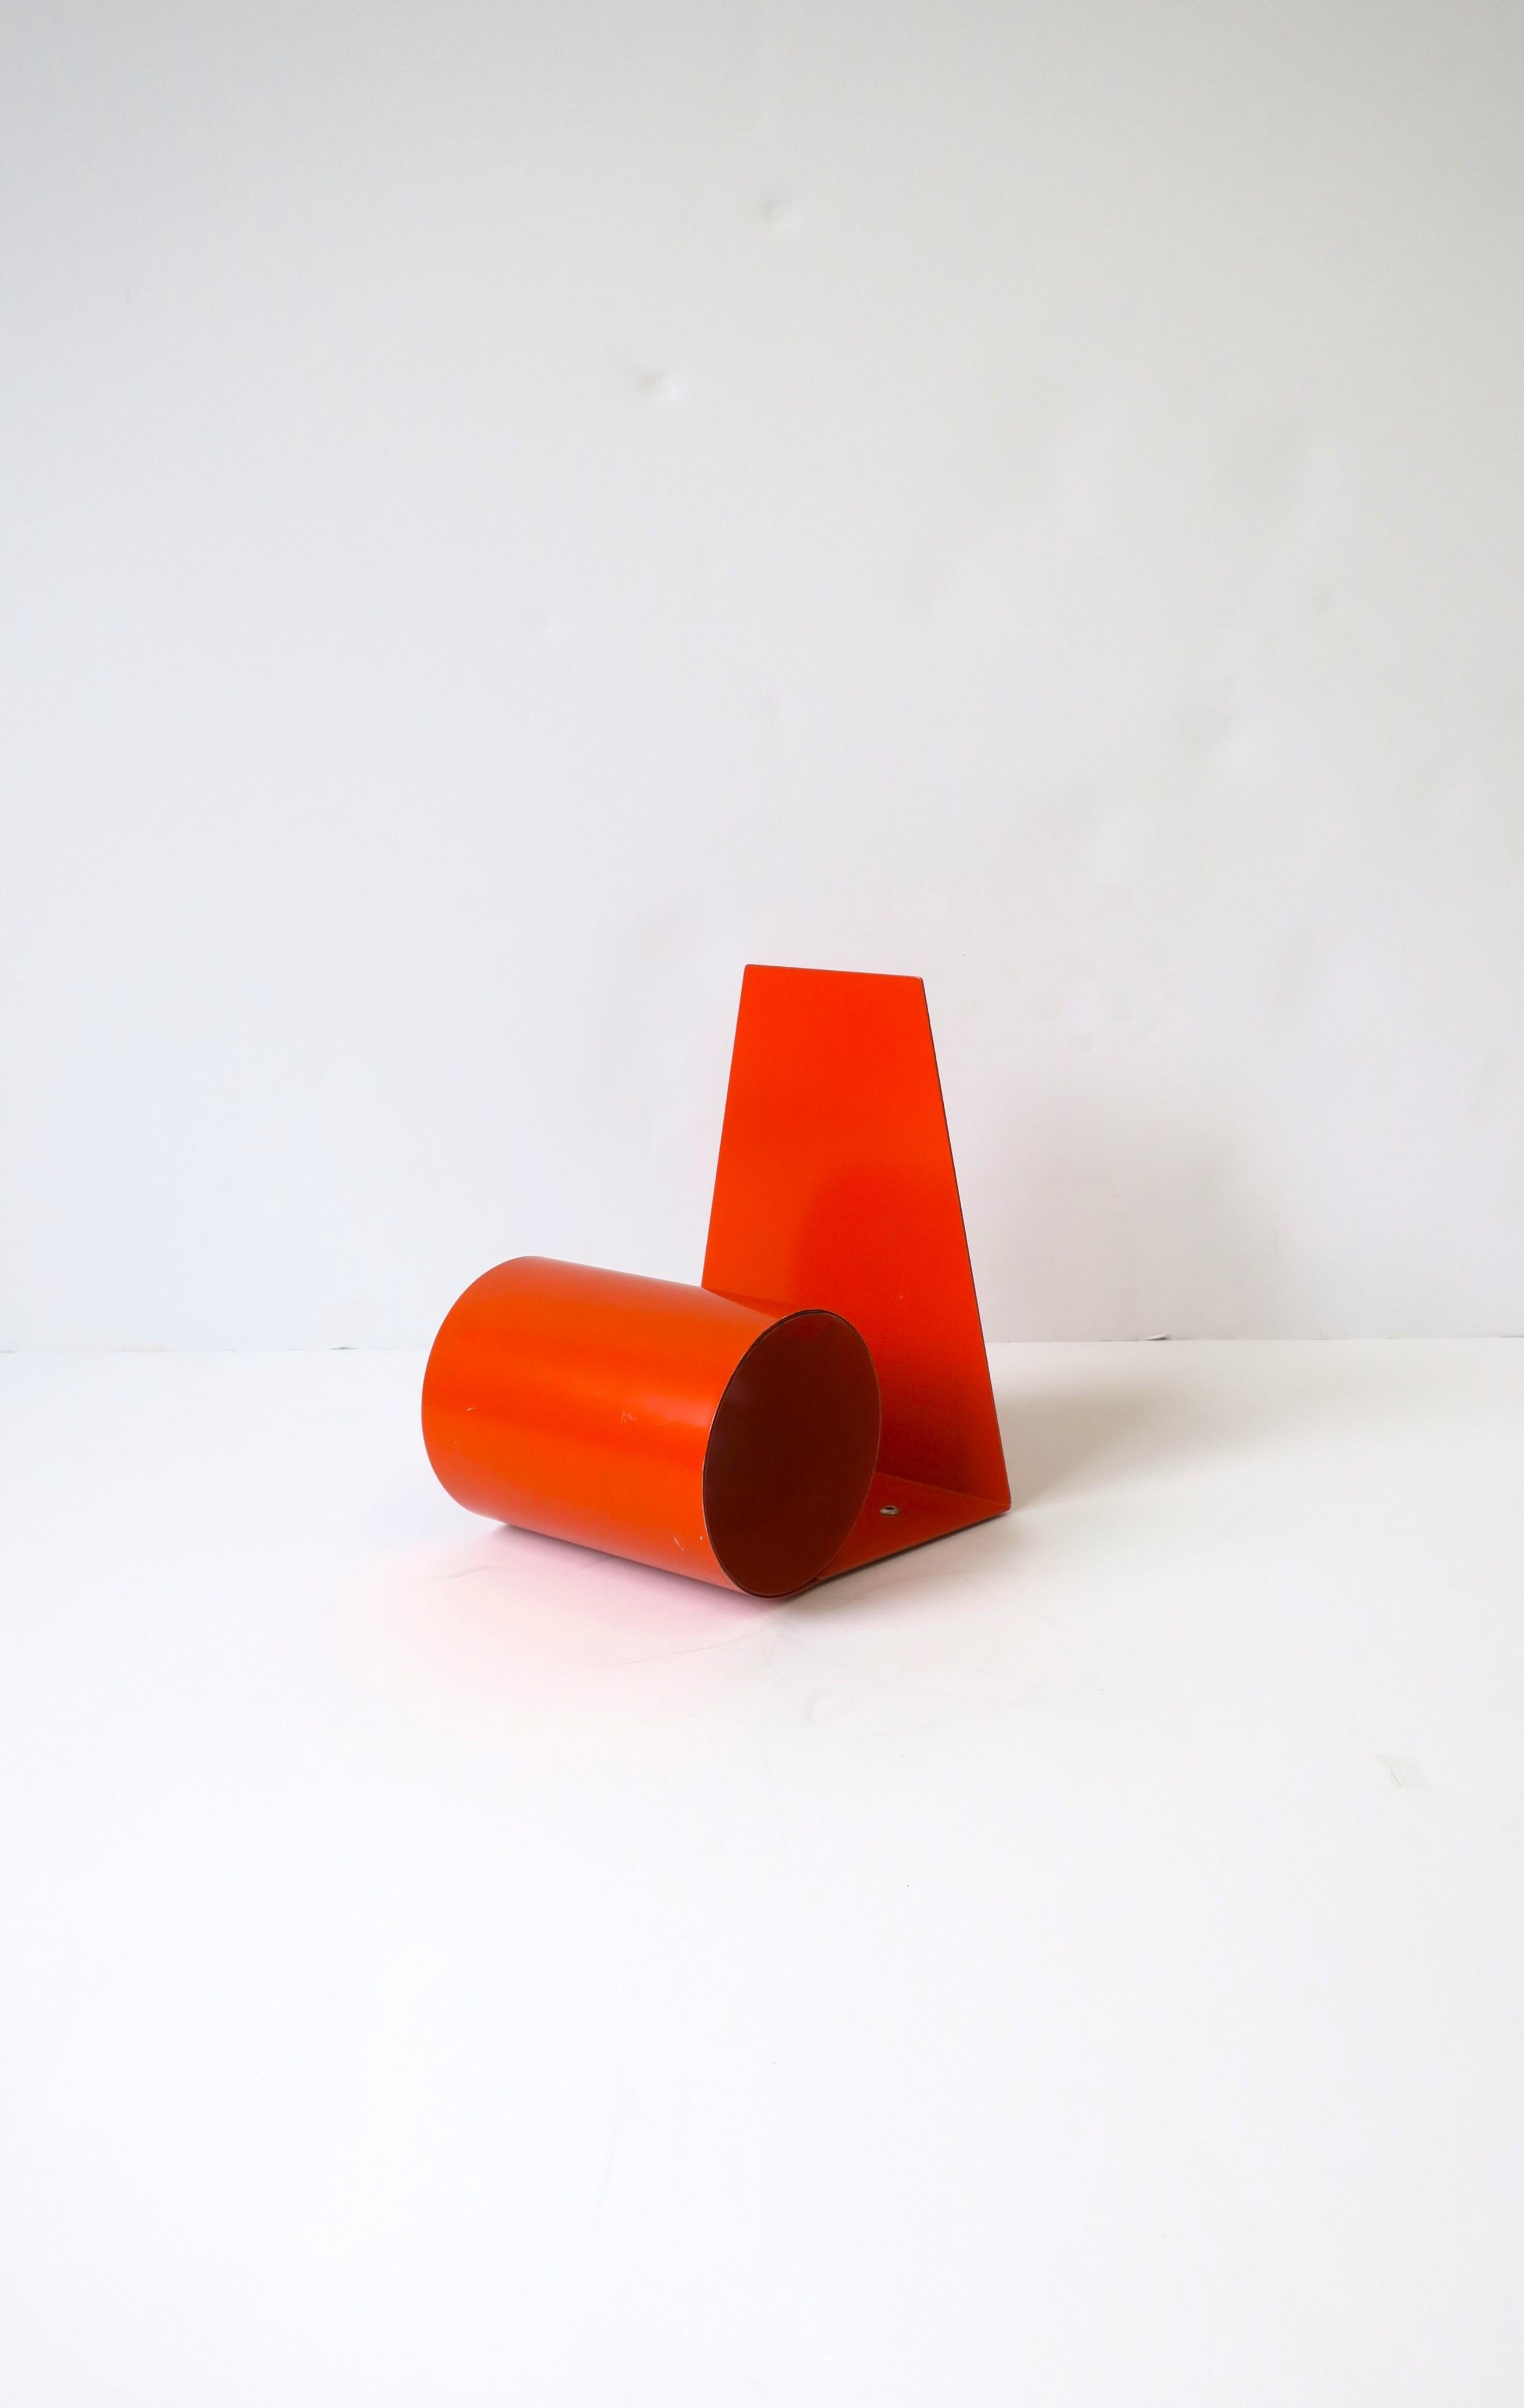 Enameled Midcentury Modern Expandable Orange Metal Bookend Holder, Made in England For Sale